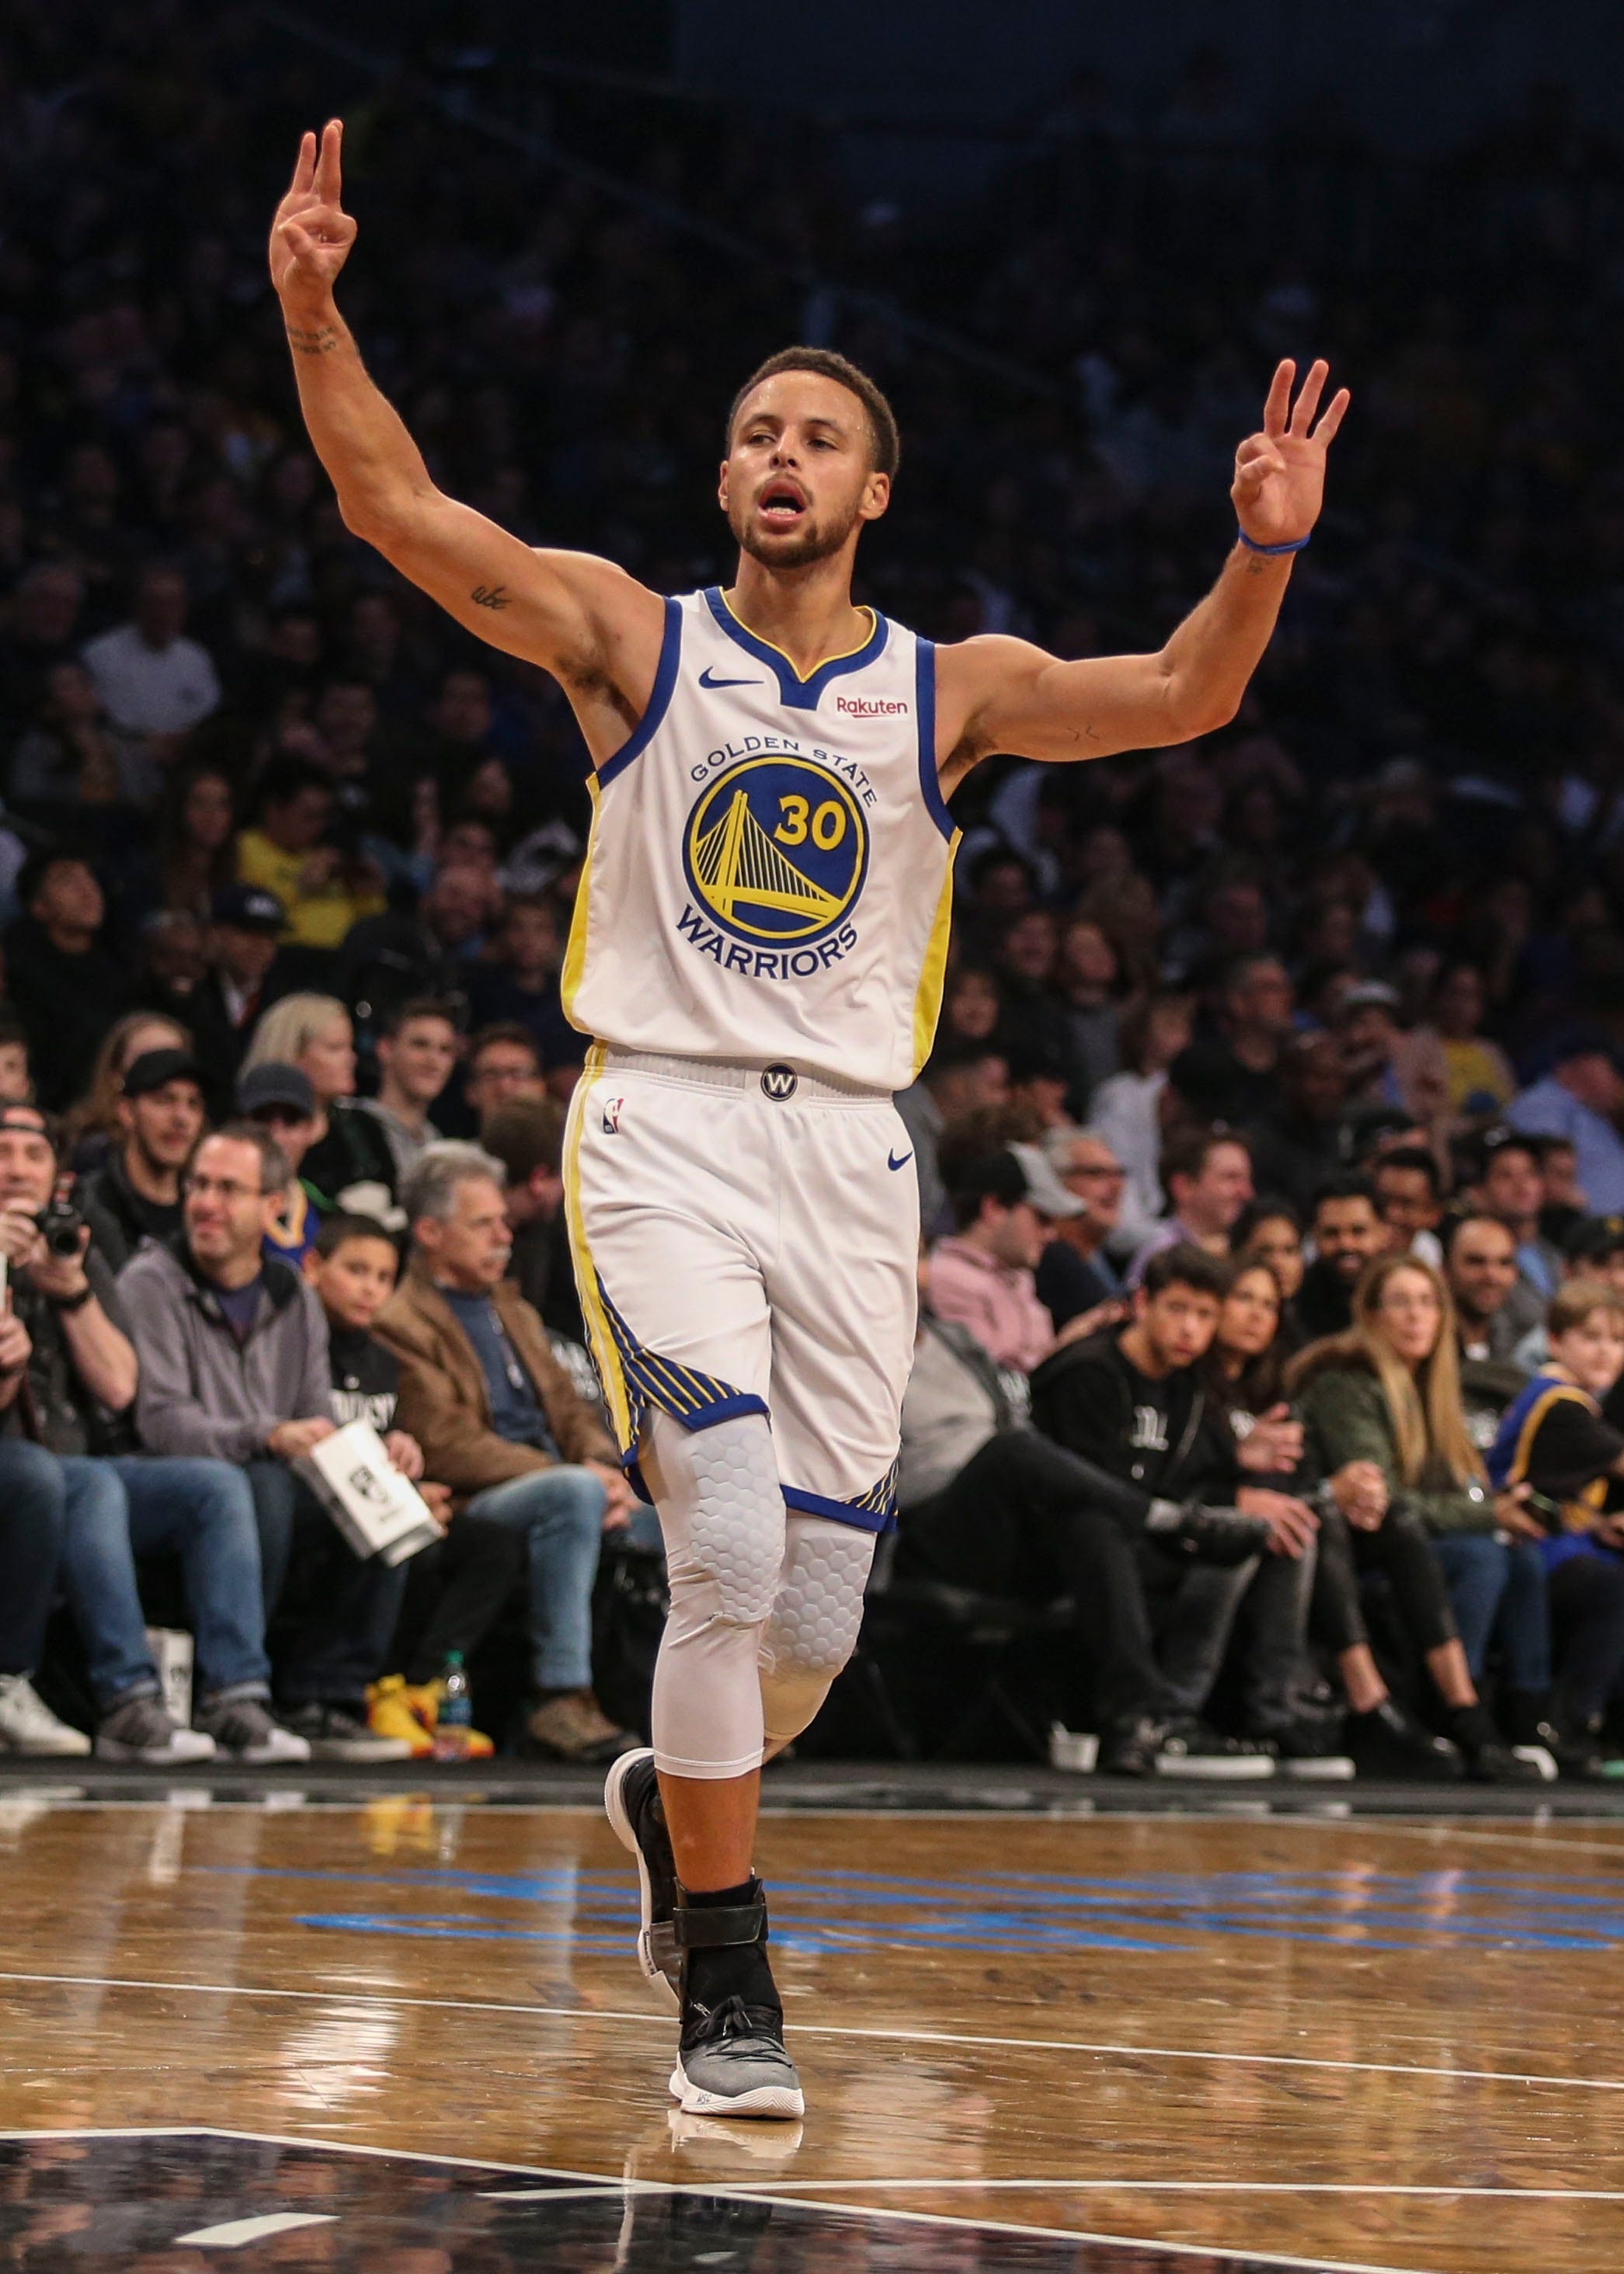 Steph Curry sets another record for 3s in Warriors' win over Nets